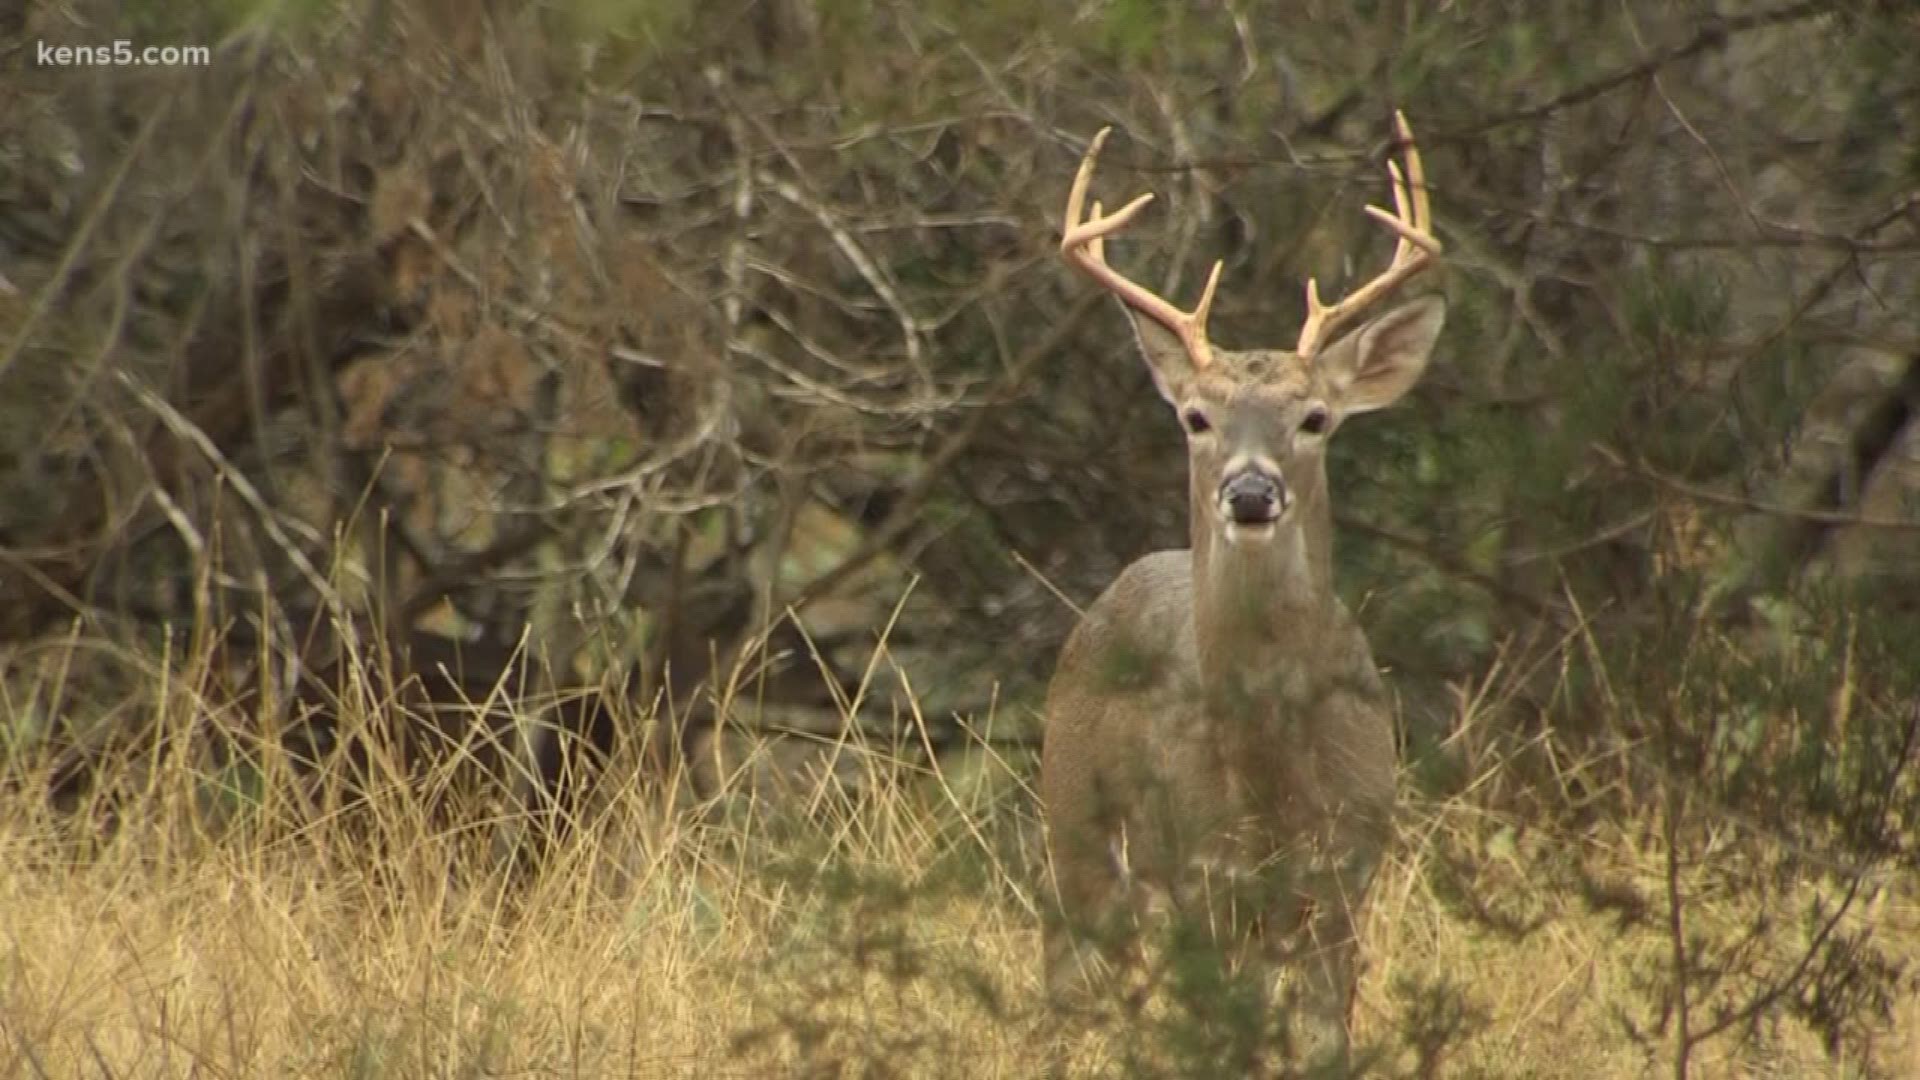 Texas Parks and Wildlife restrictions have led to bigger, more mature bucks for hunting the last few years in the San Antonio area.